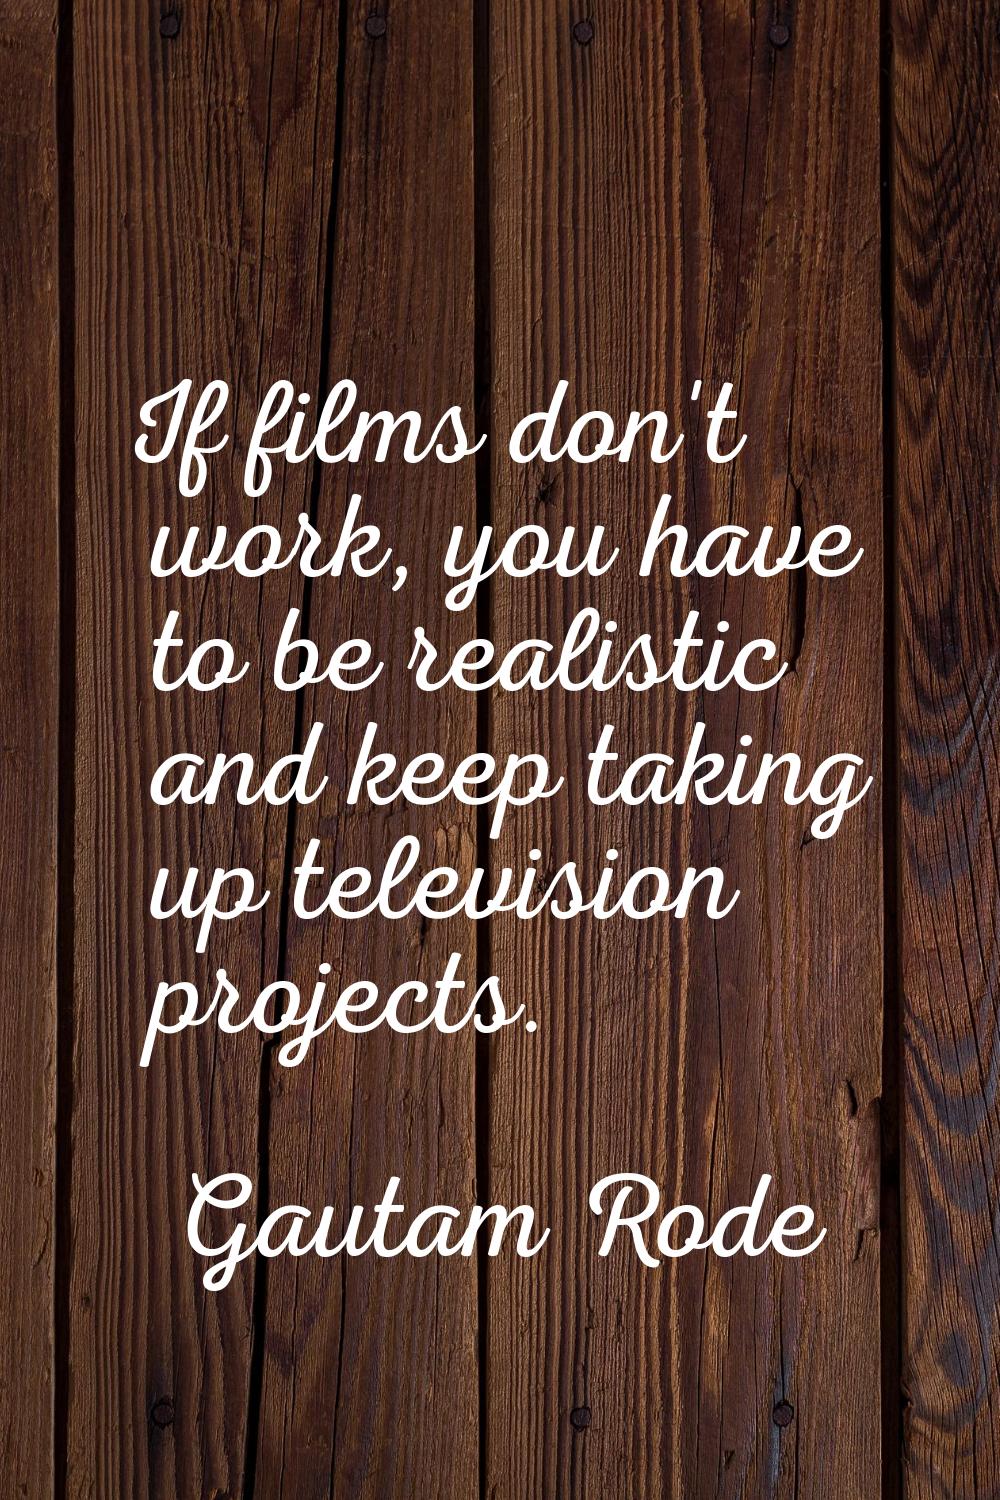 If films don't work, you have to be realistic and keep taking up television projects.